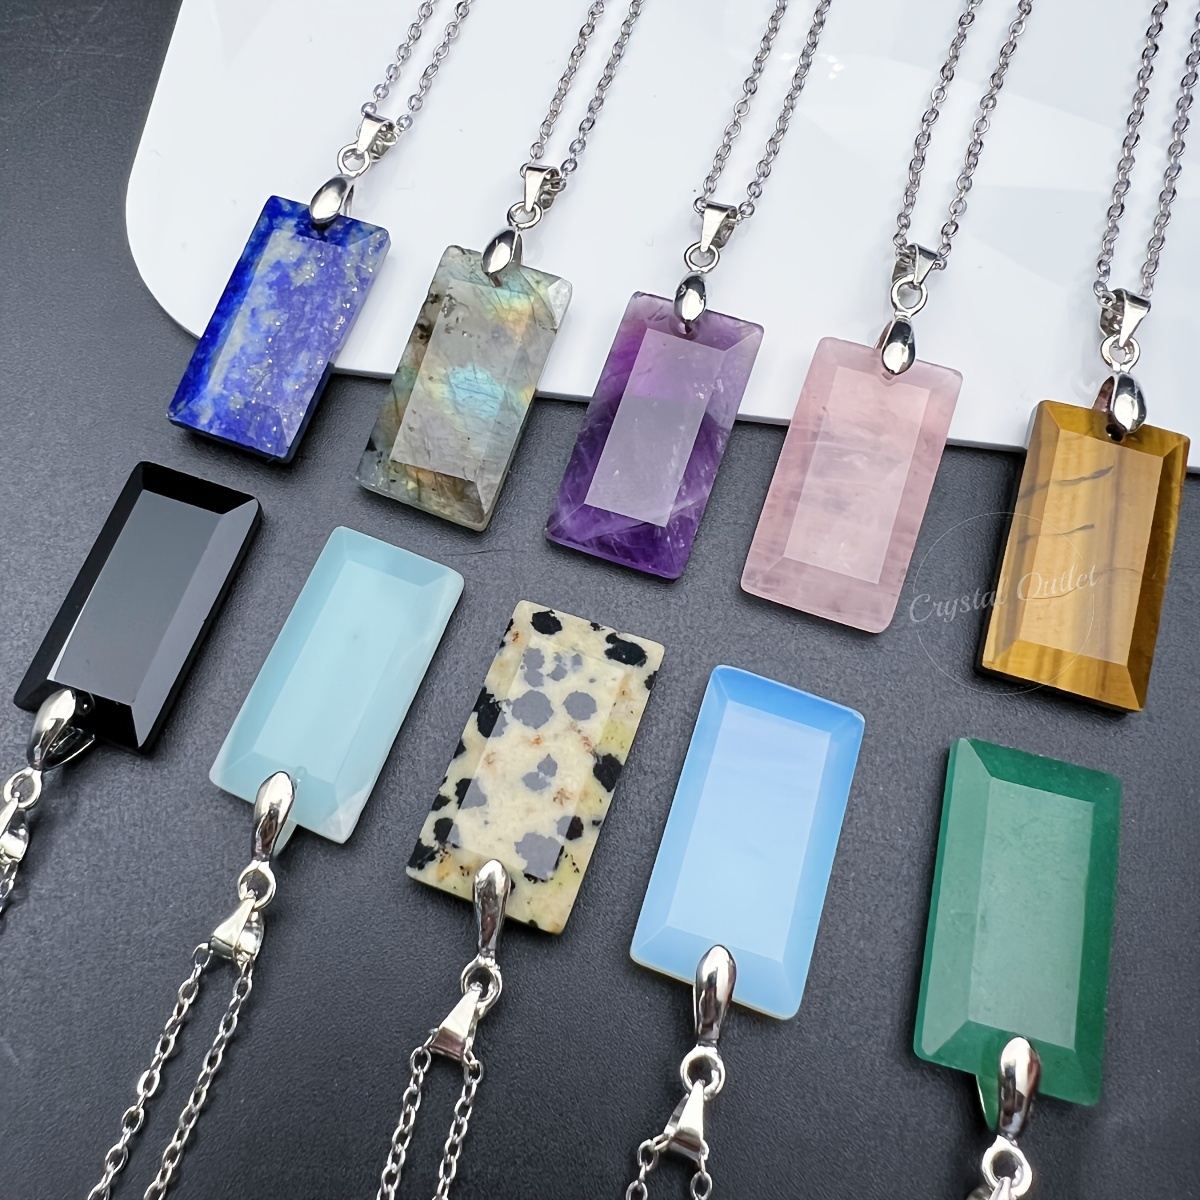 

1pc Natural Crystal Faceted Rectangle Charm Square Pendant Necklaces Handmade Personality Special Elegant Versatile Daily Wearing Holiday Gift For Men Women Party Jewelry Accessory